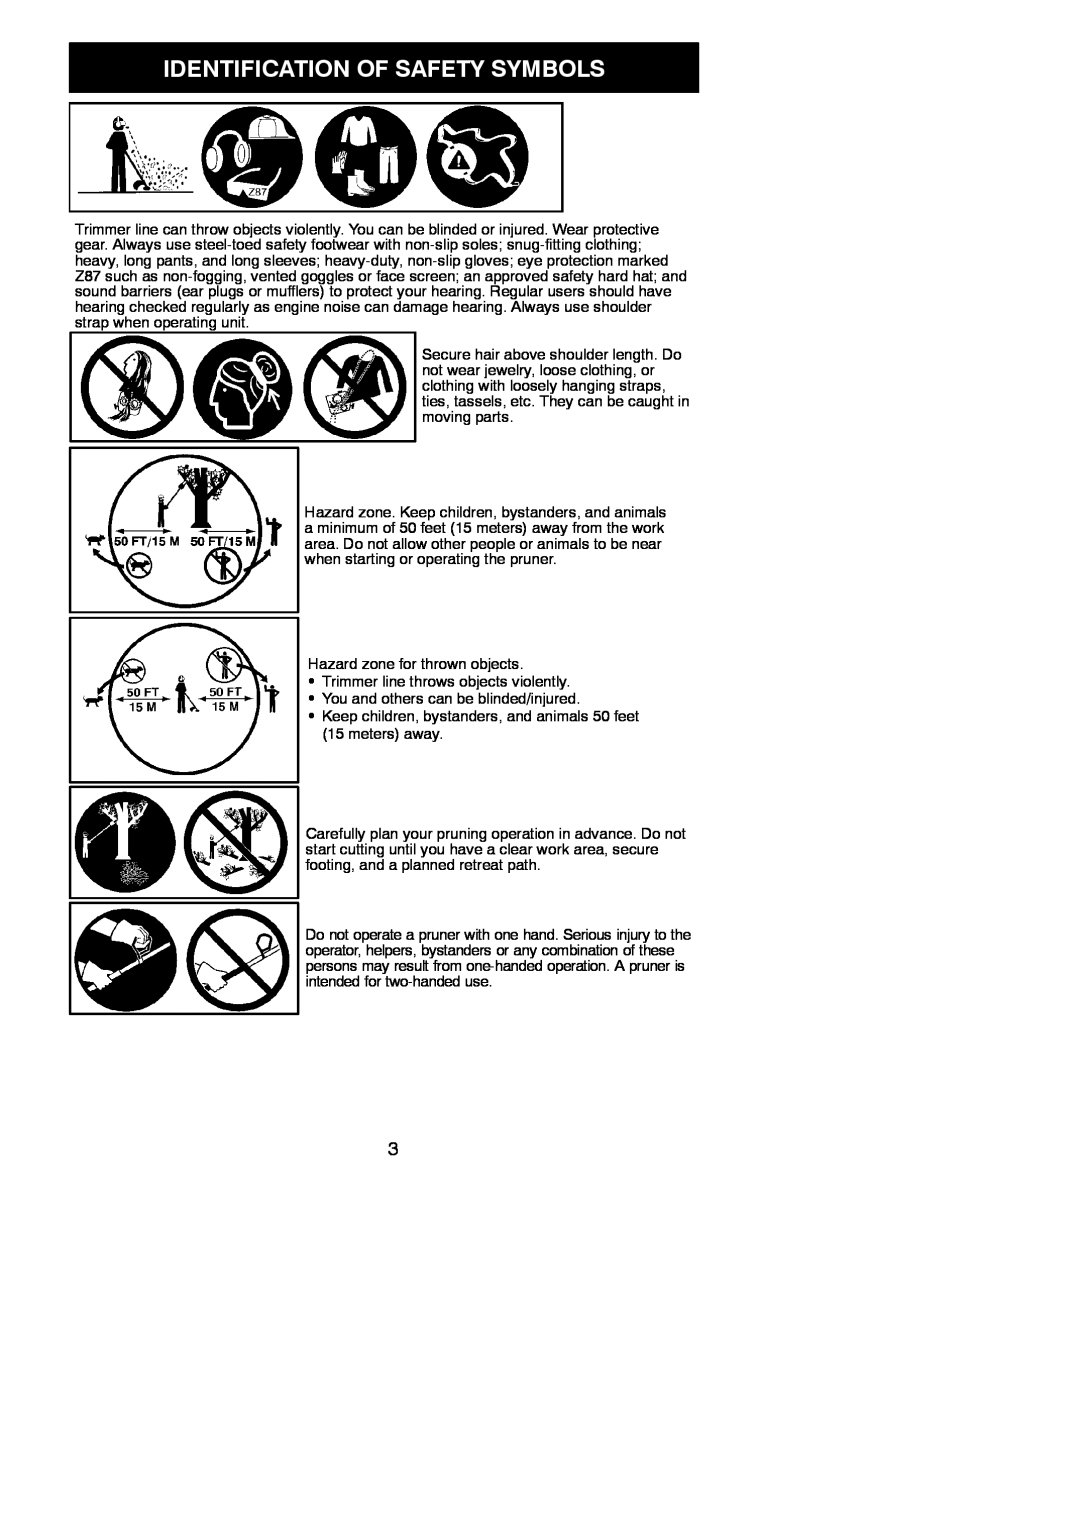 Poulan 115244926, 966423701 instruction manual Identification Of Safety Symbols, Hazard zone for thrown objects 